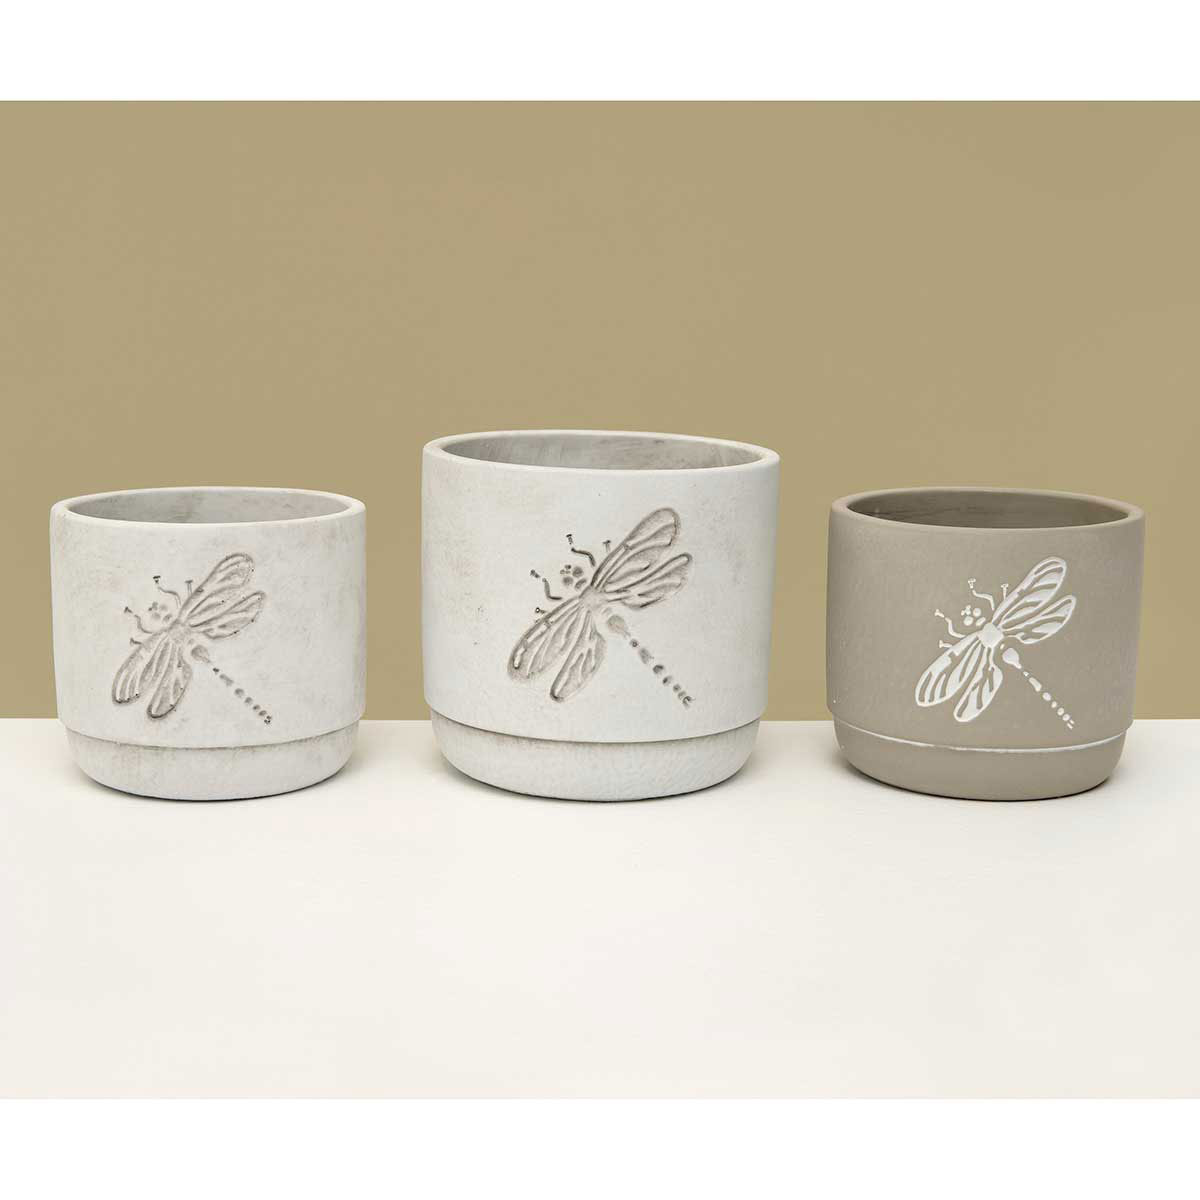 POT DRAGONFLY WHITE WASH SMALL 4.75IN X 4IN CONCRETE